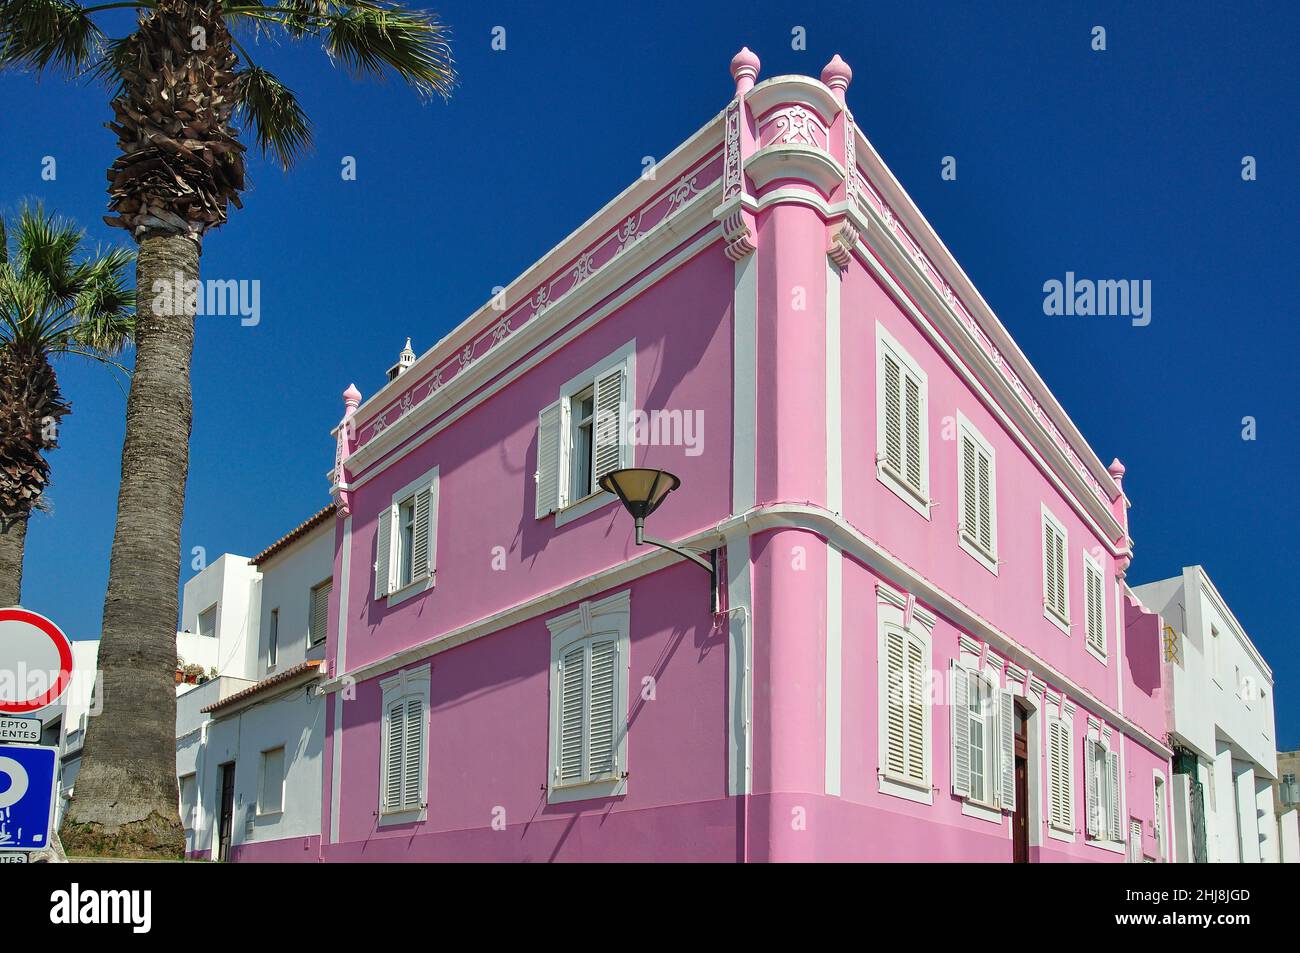 Colourful house in Old Town, Lagos, Lagos Municipality, Algarve Region, Portugal Stock Photo